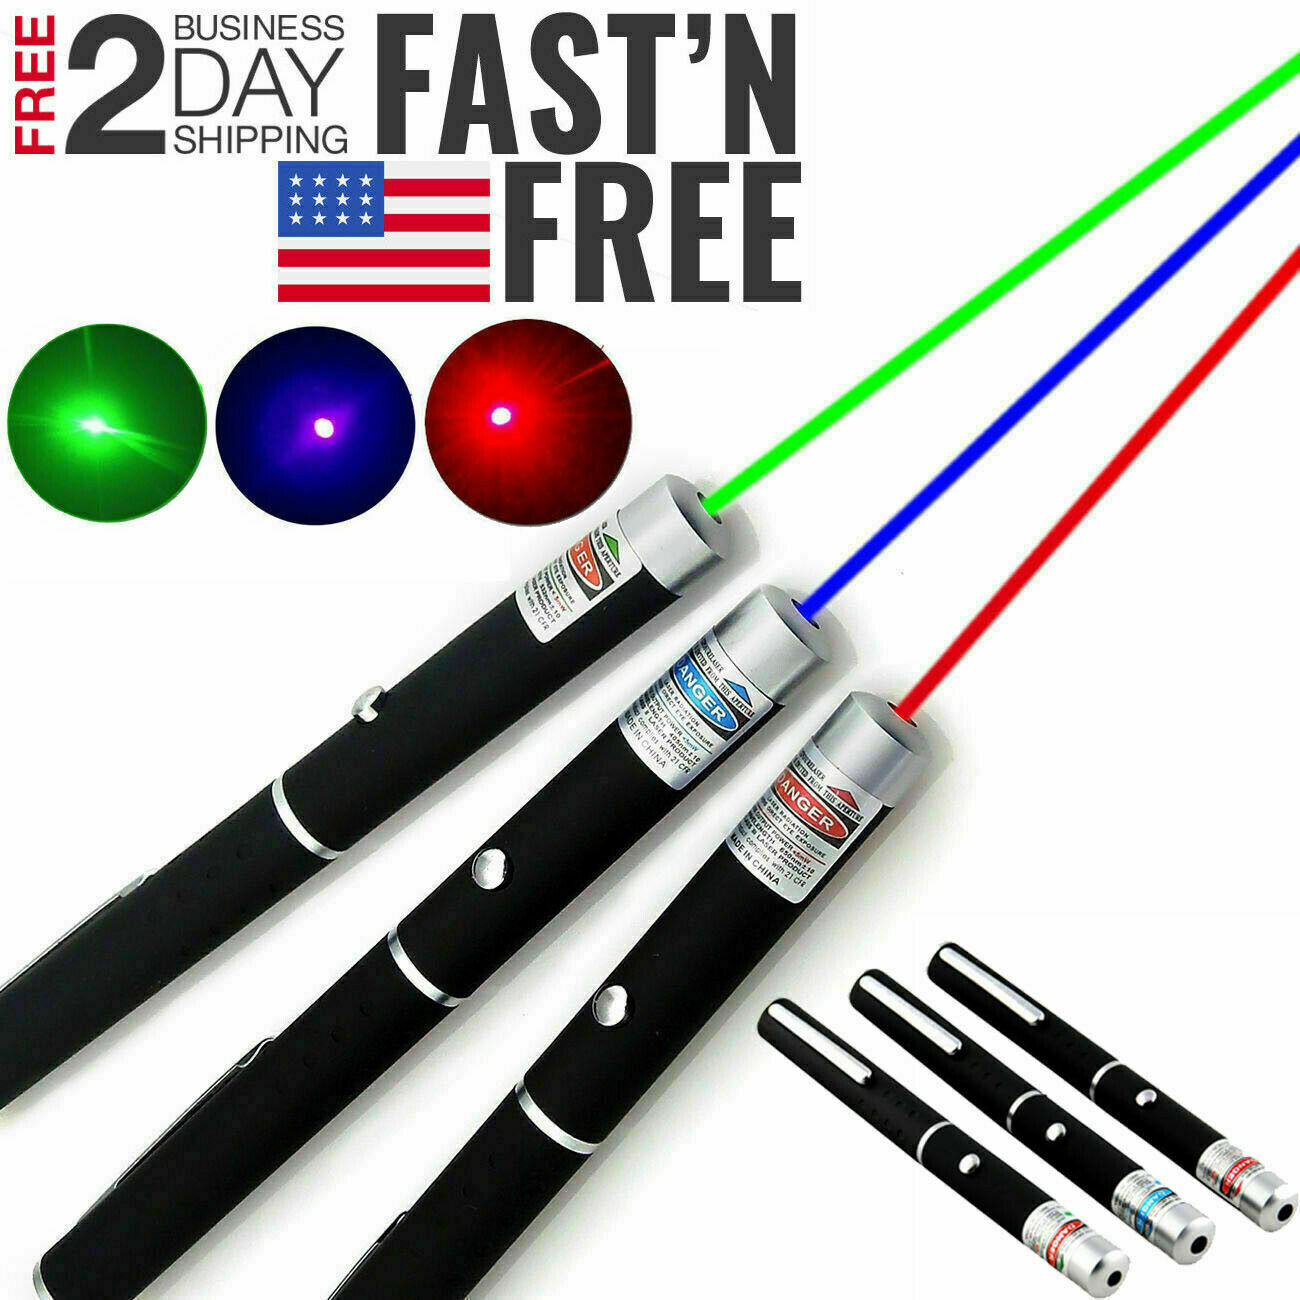 3 Packs 5 m W Strong Laser Pointer Pen Green Blue Red Light Visible Beam For Pet